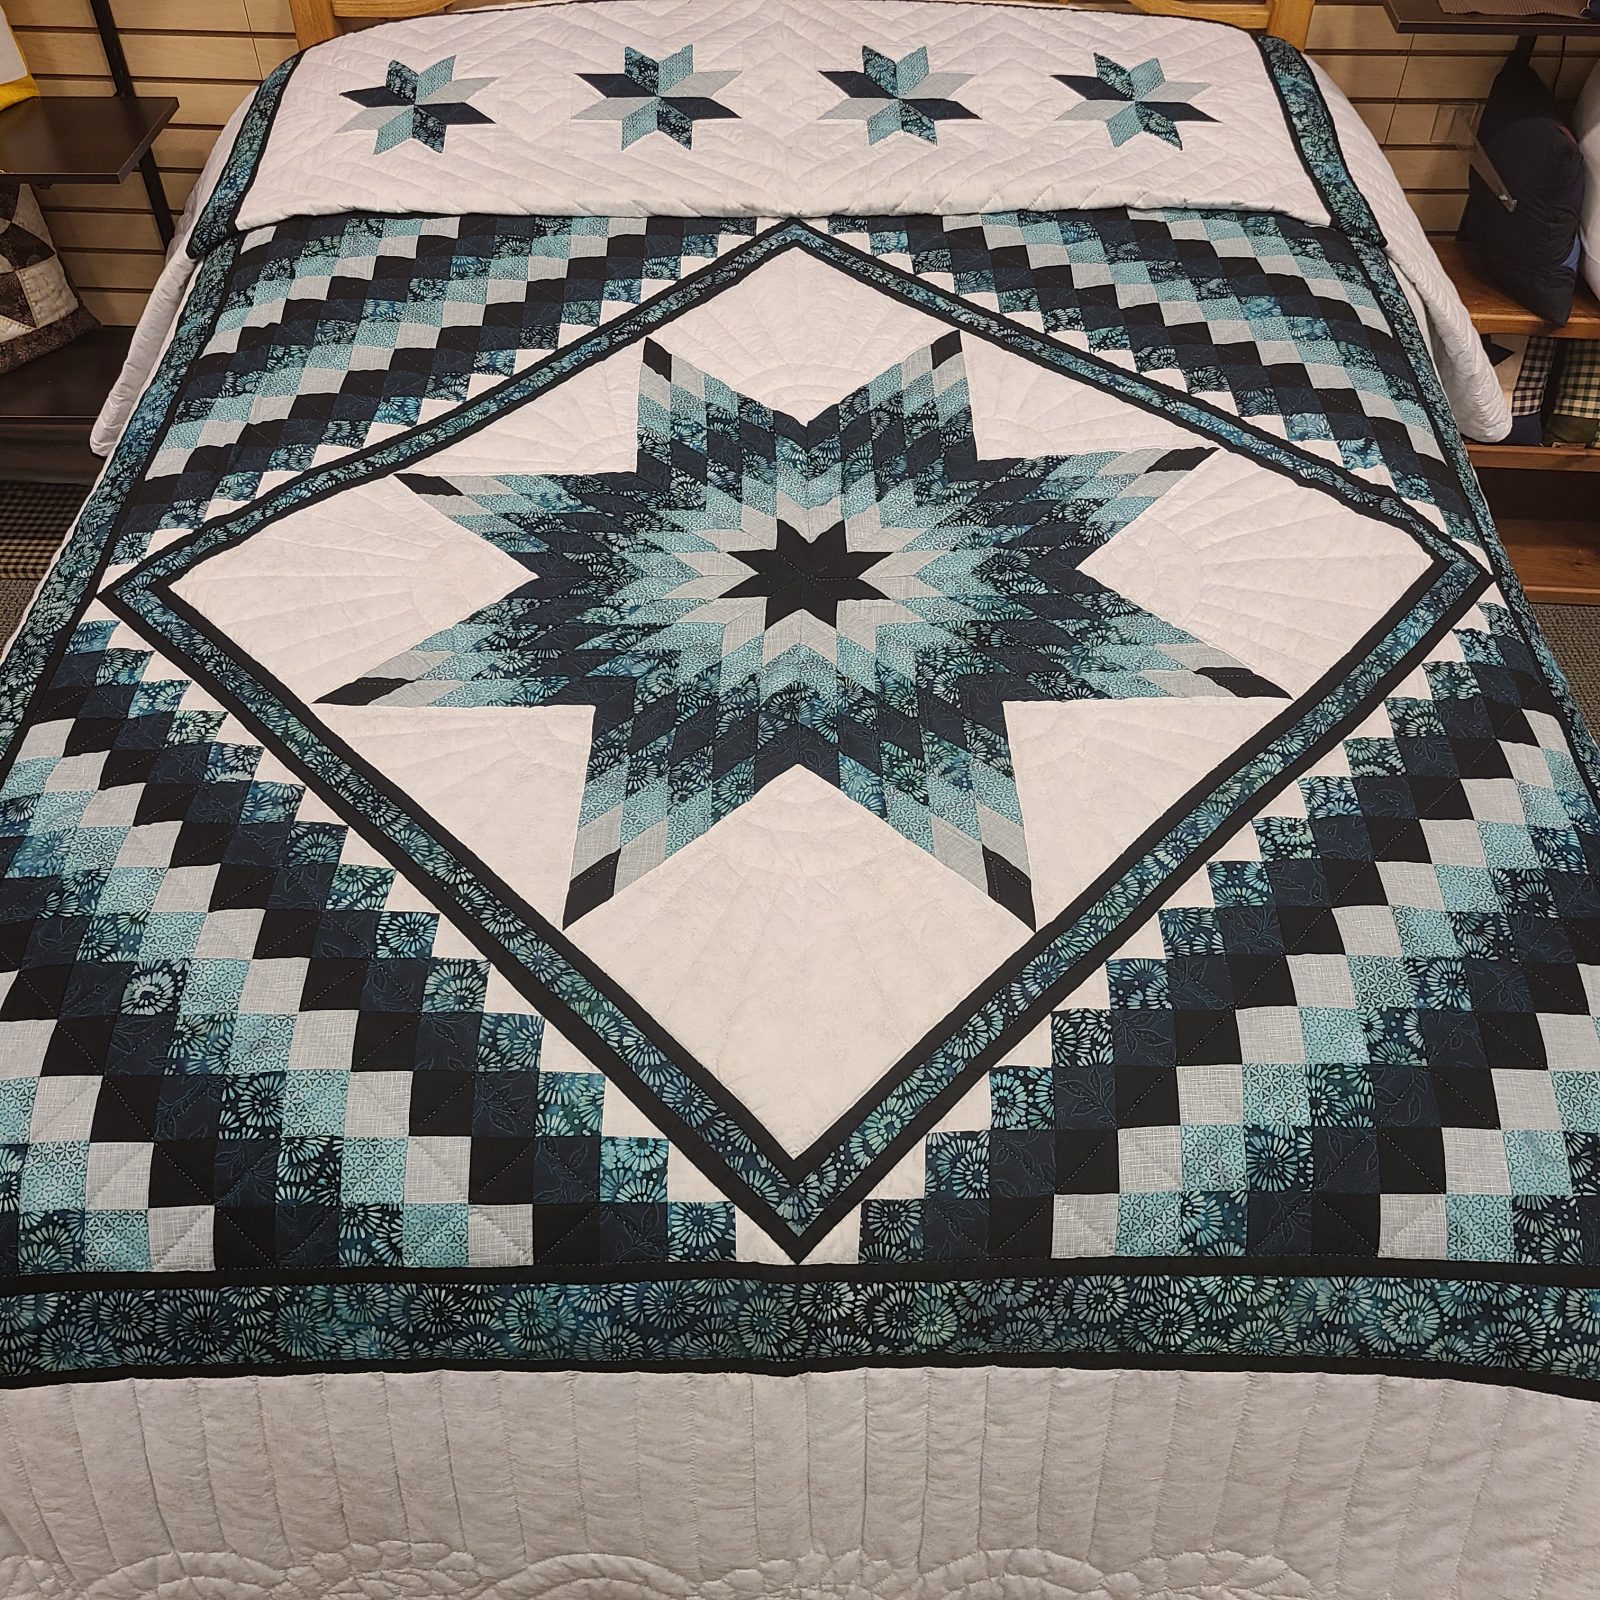 Homemade Quilts FOR SALE | Buy Amish Handmade Quilts | Heirloom Quilt